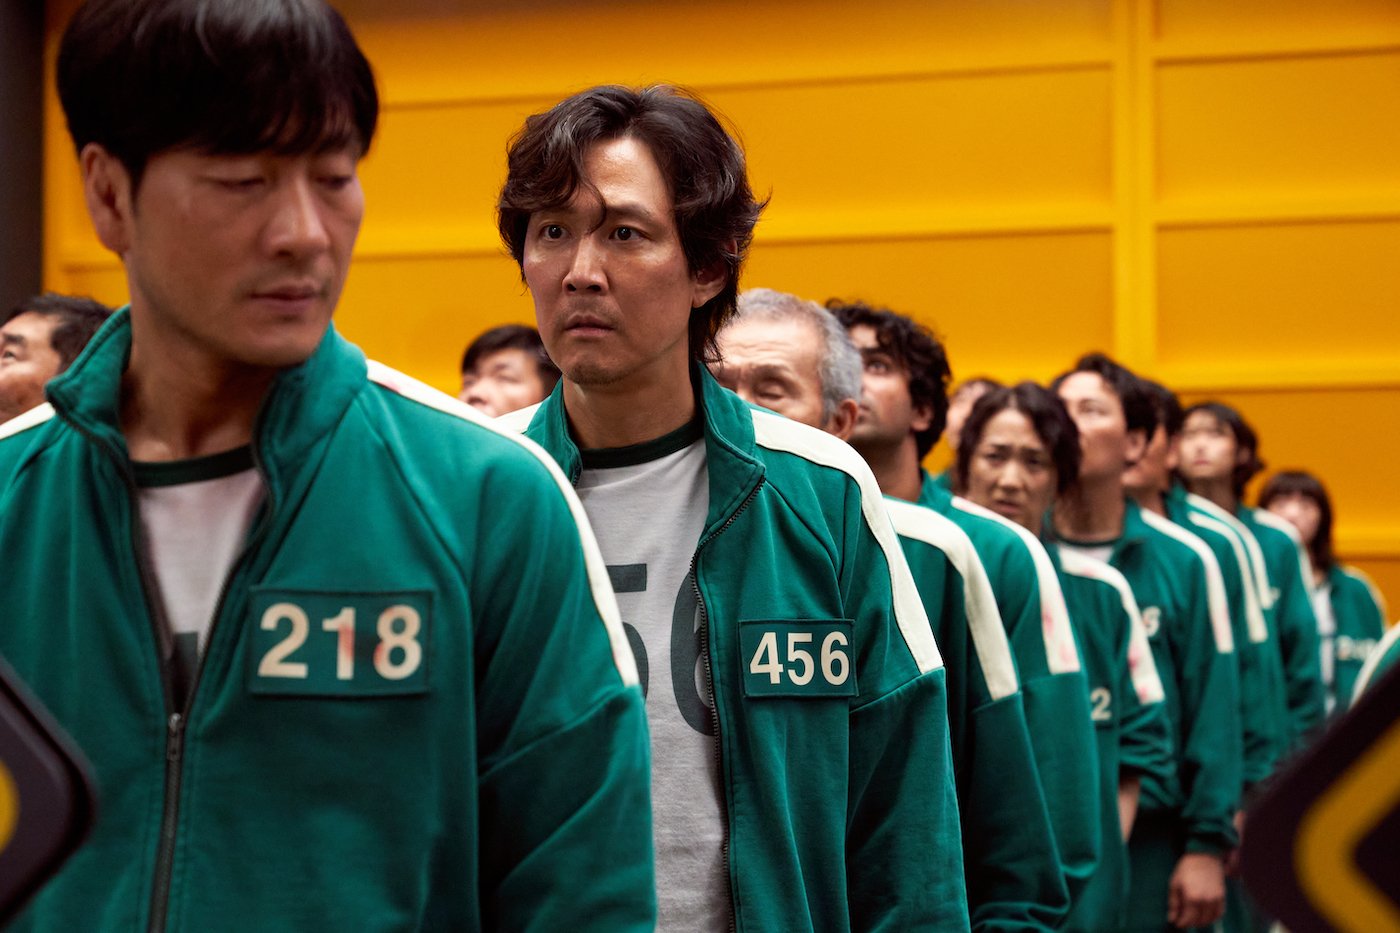 'Squid Game' cast members lining up in their track suits